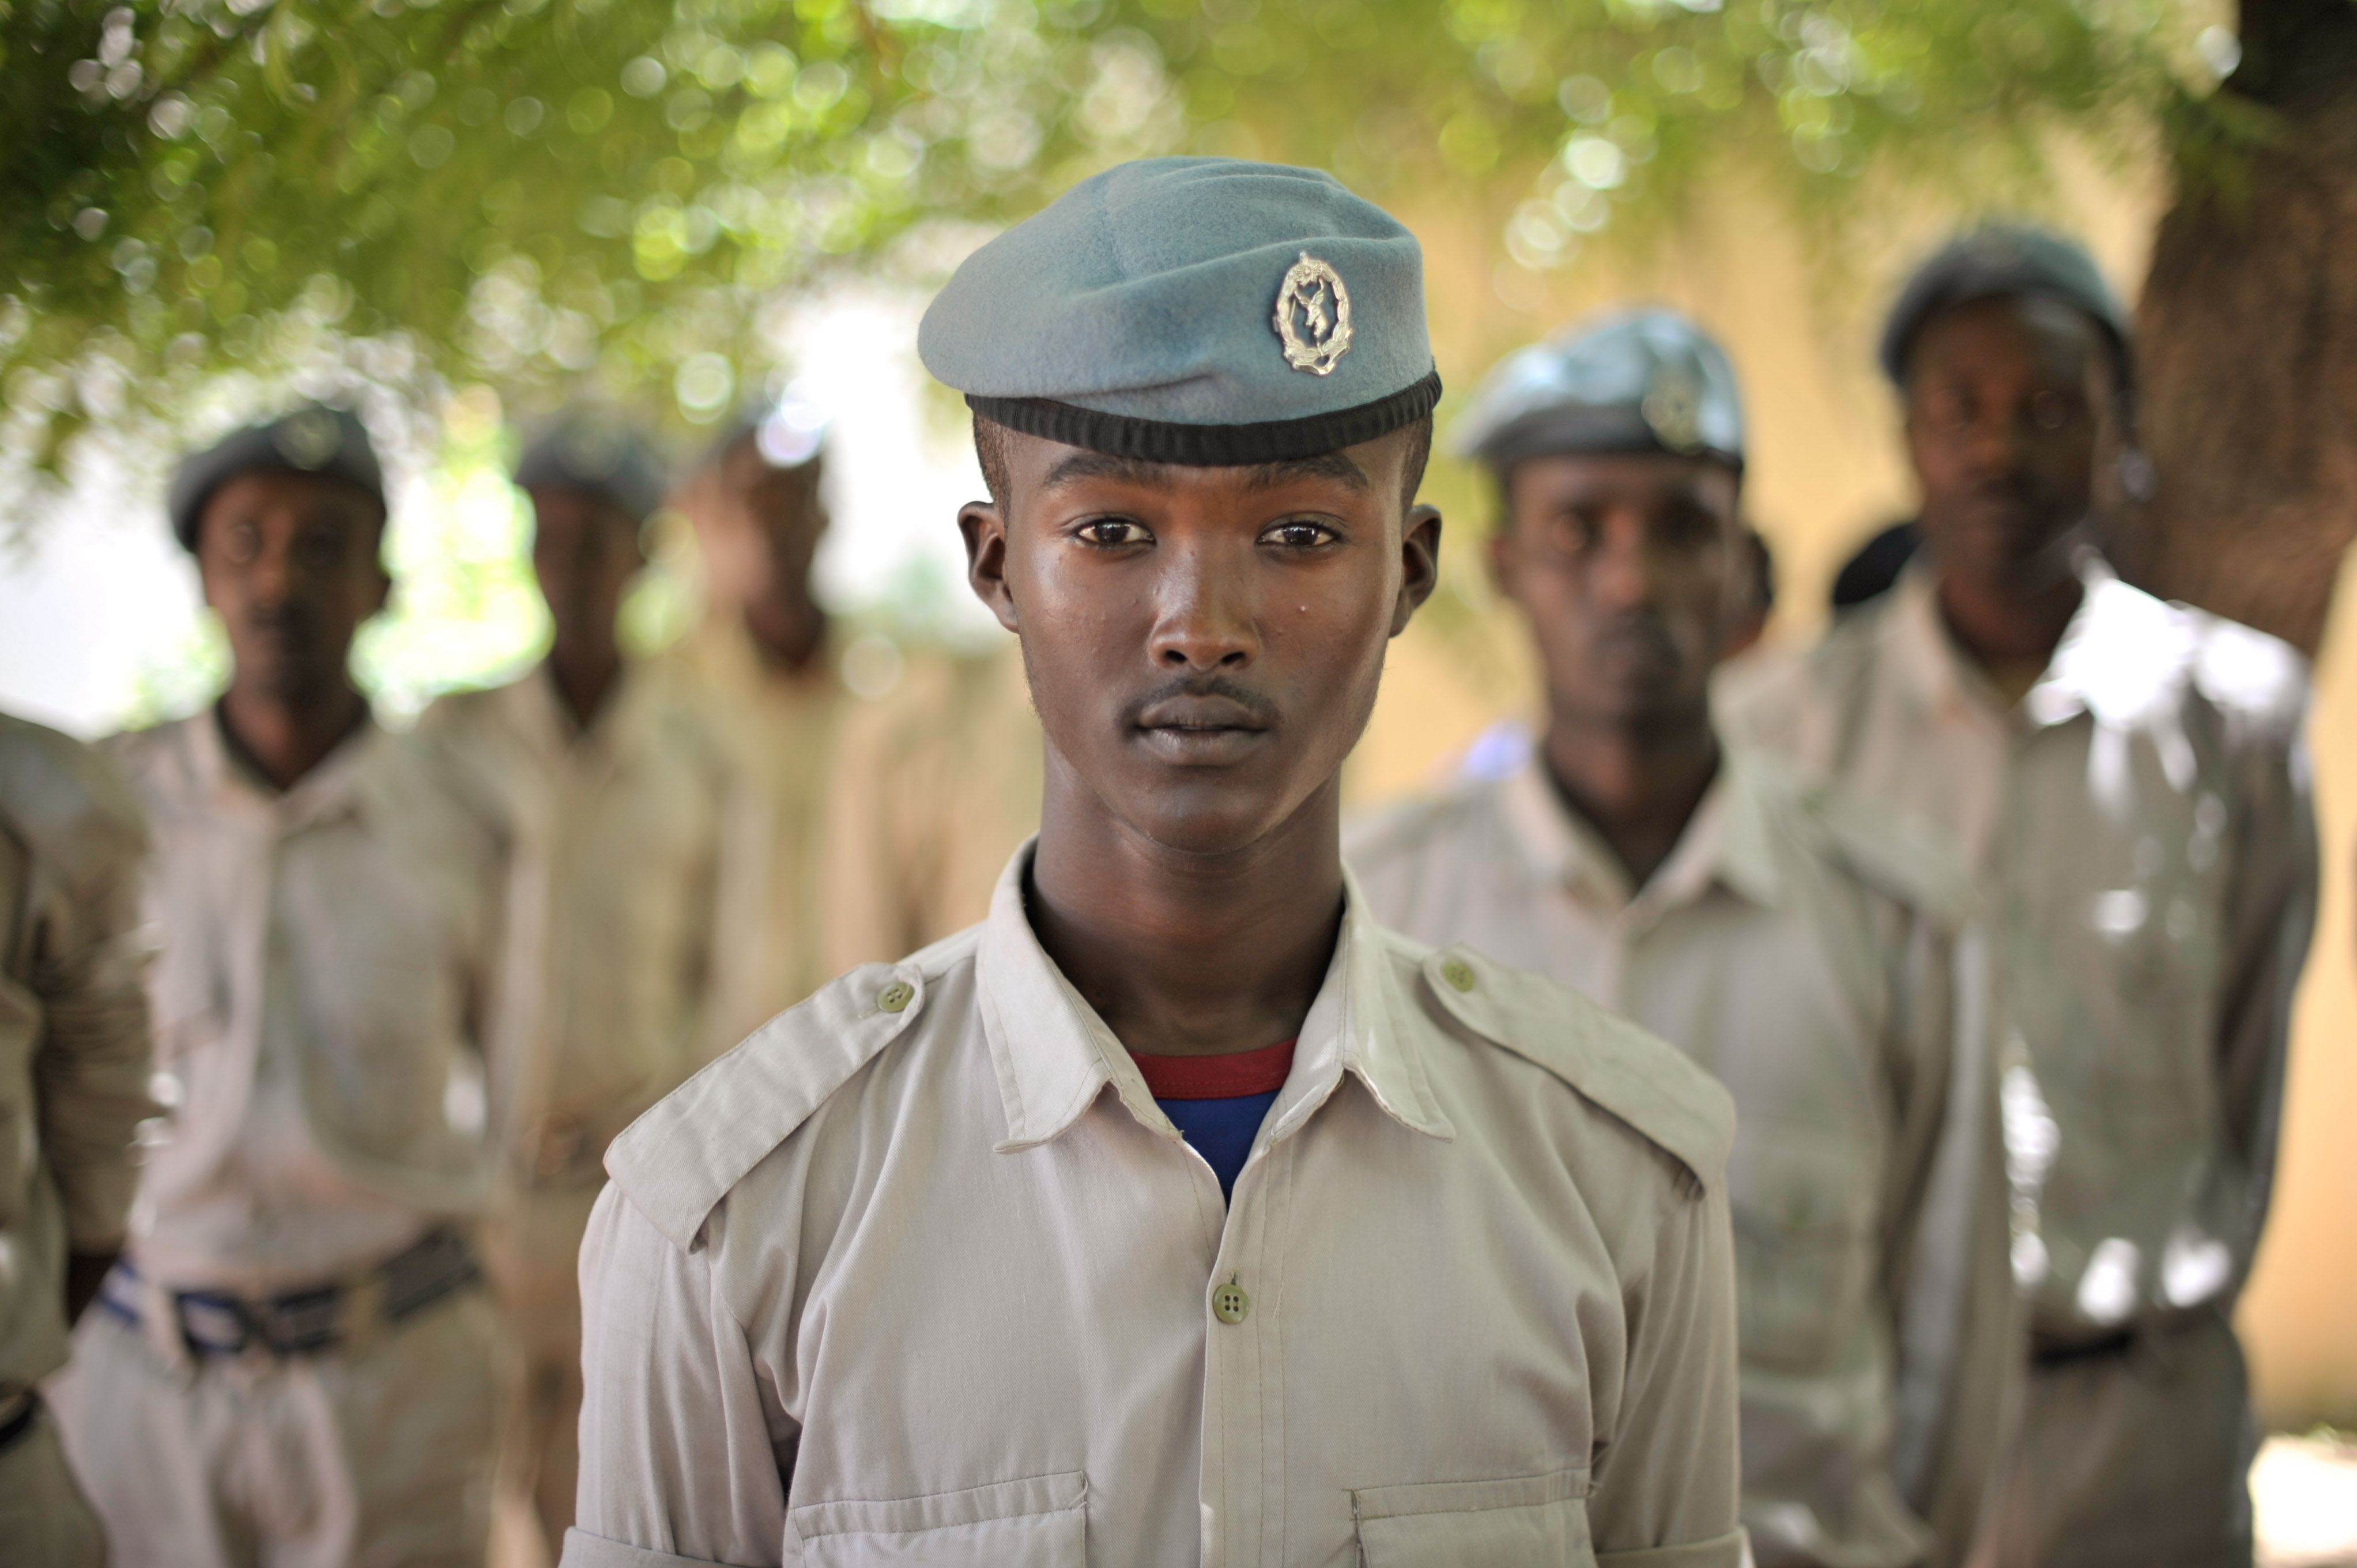 Police officers at General Kahiye Police Academy in Mogadishu, Somalia, watch a training excercise conducted by the African Union on June 16. The African Union is currently training one hundred Somali (14442737225)